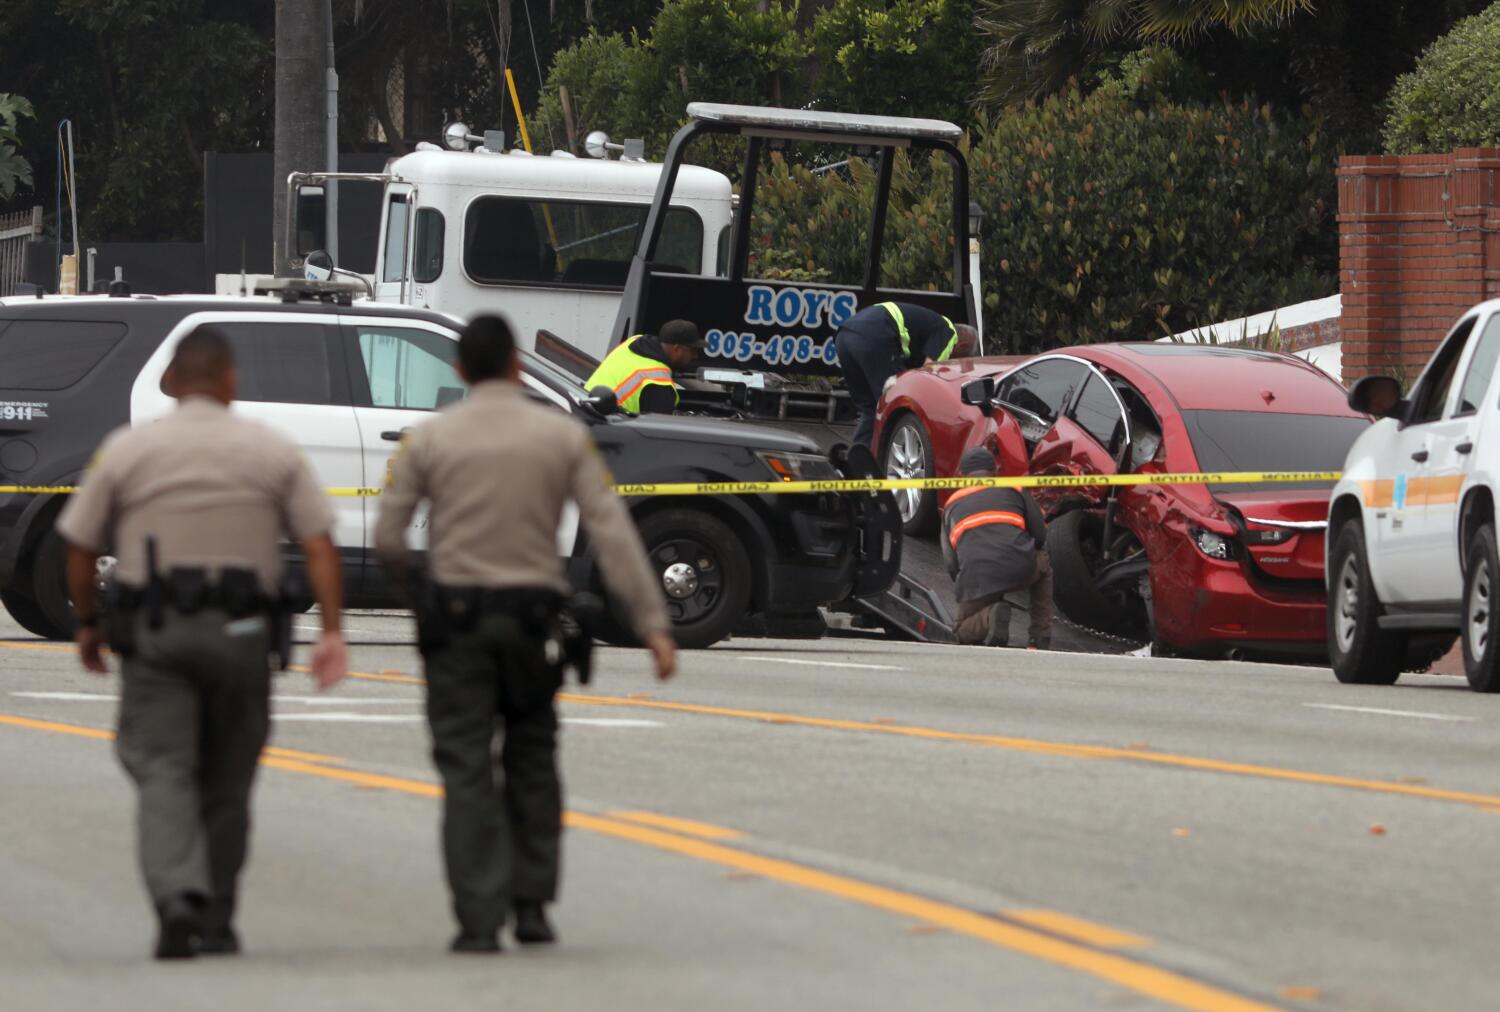 Driver sped at 104 mph in Malibu crash that killed 4 Pepperdine students, D.A. says